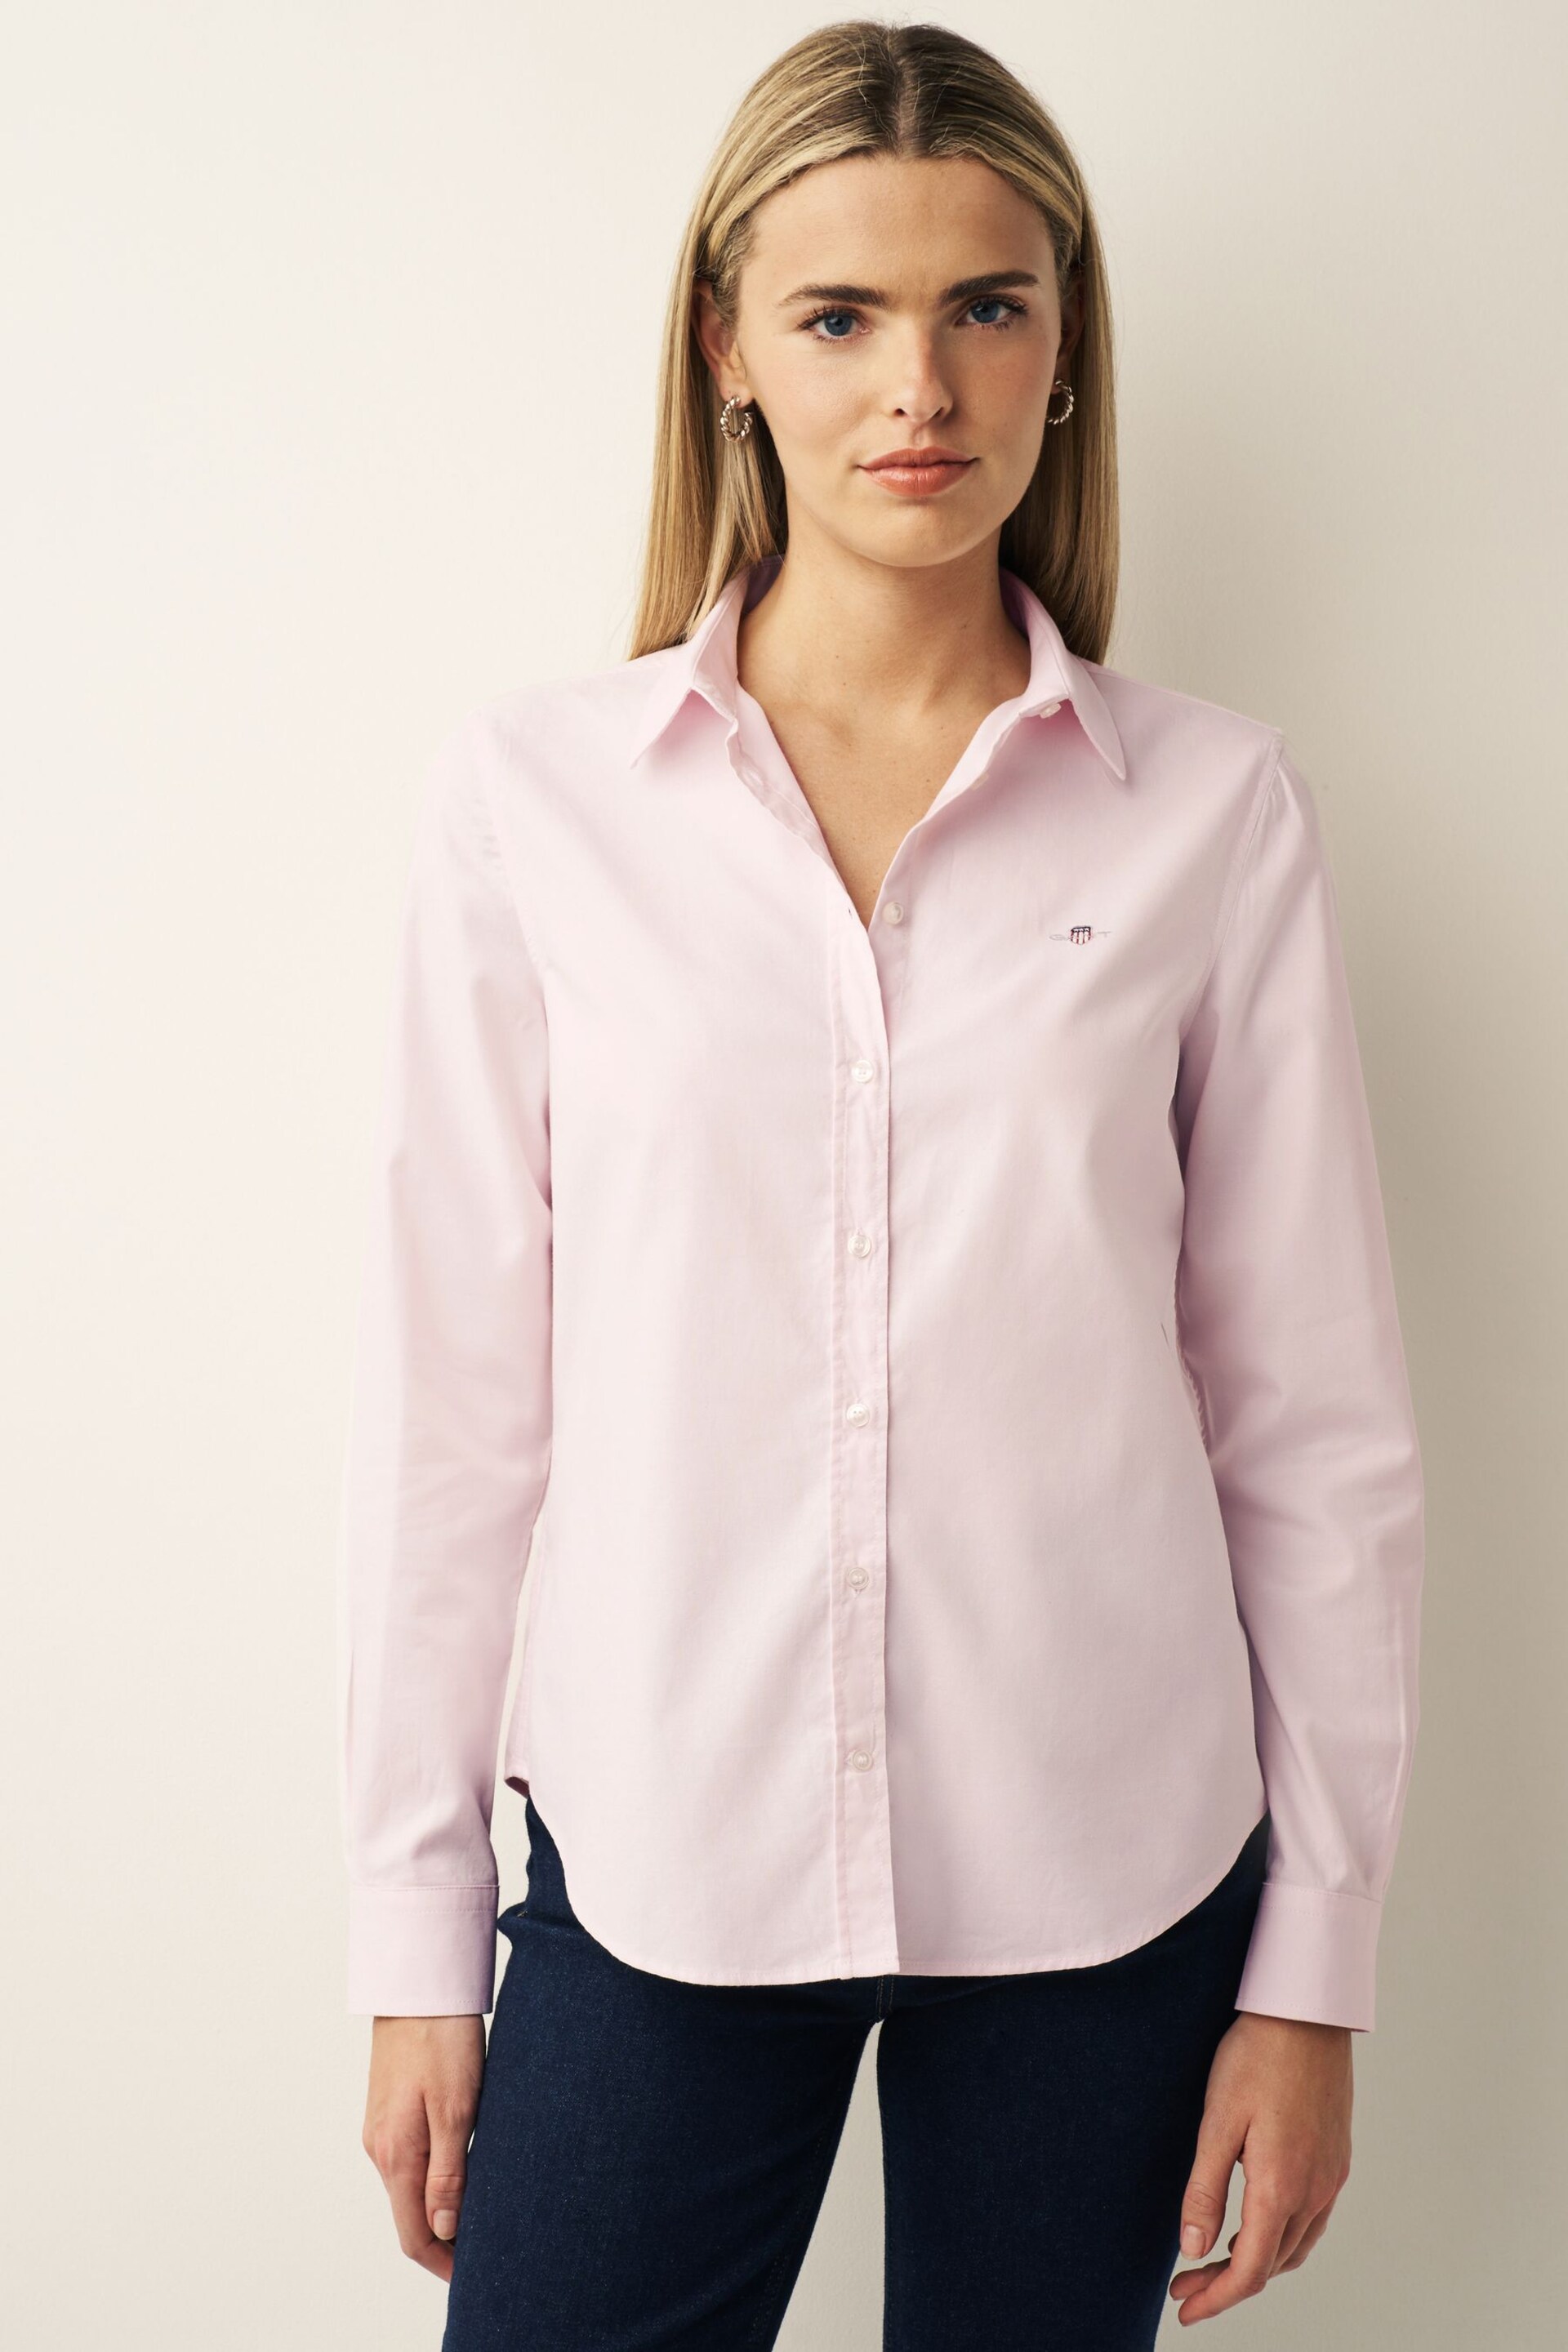 GANT Pink Fitted Stretch Oxford Shirt - Image 1 of 6